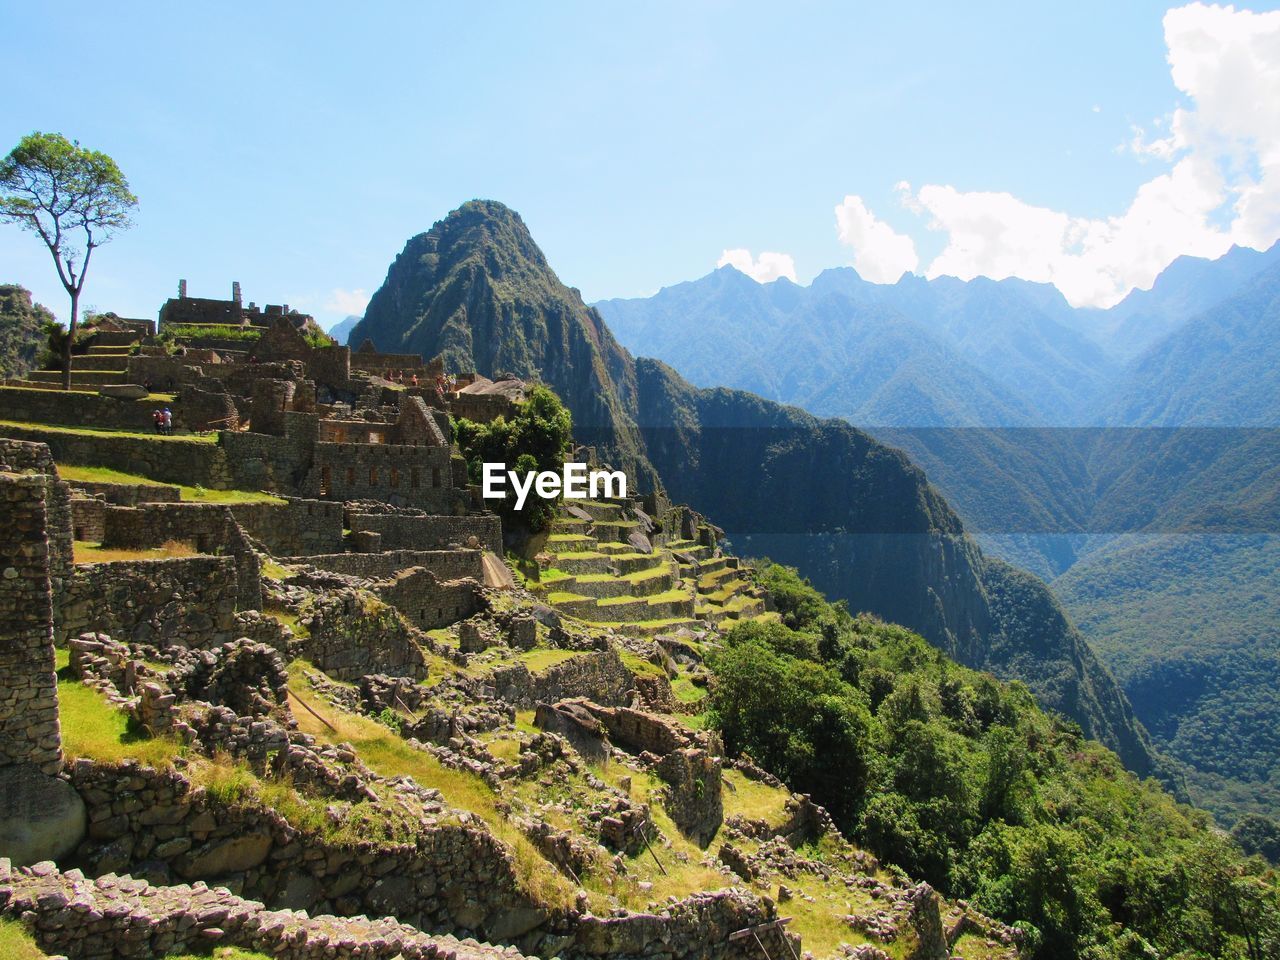 Machu picchu from another perspective